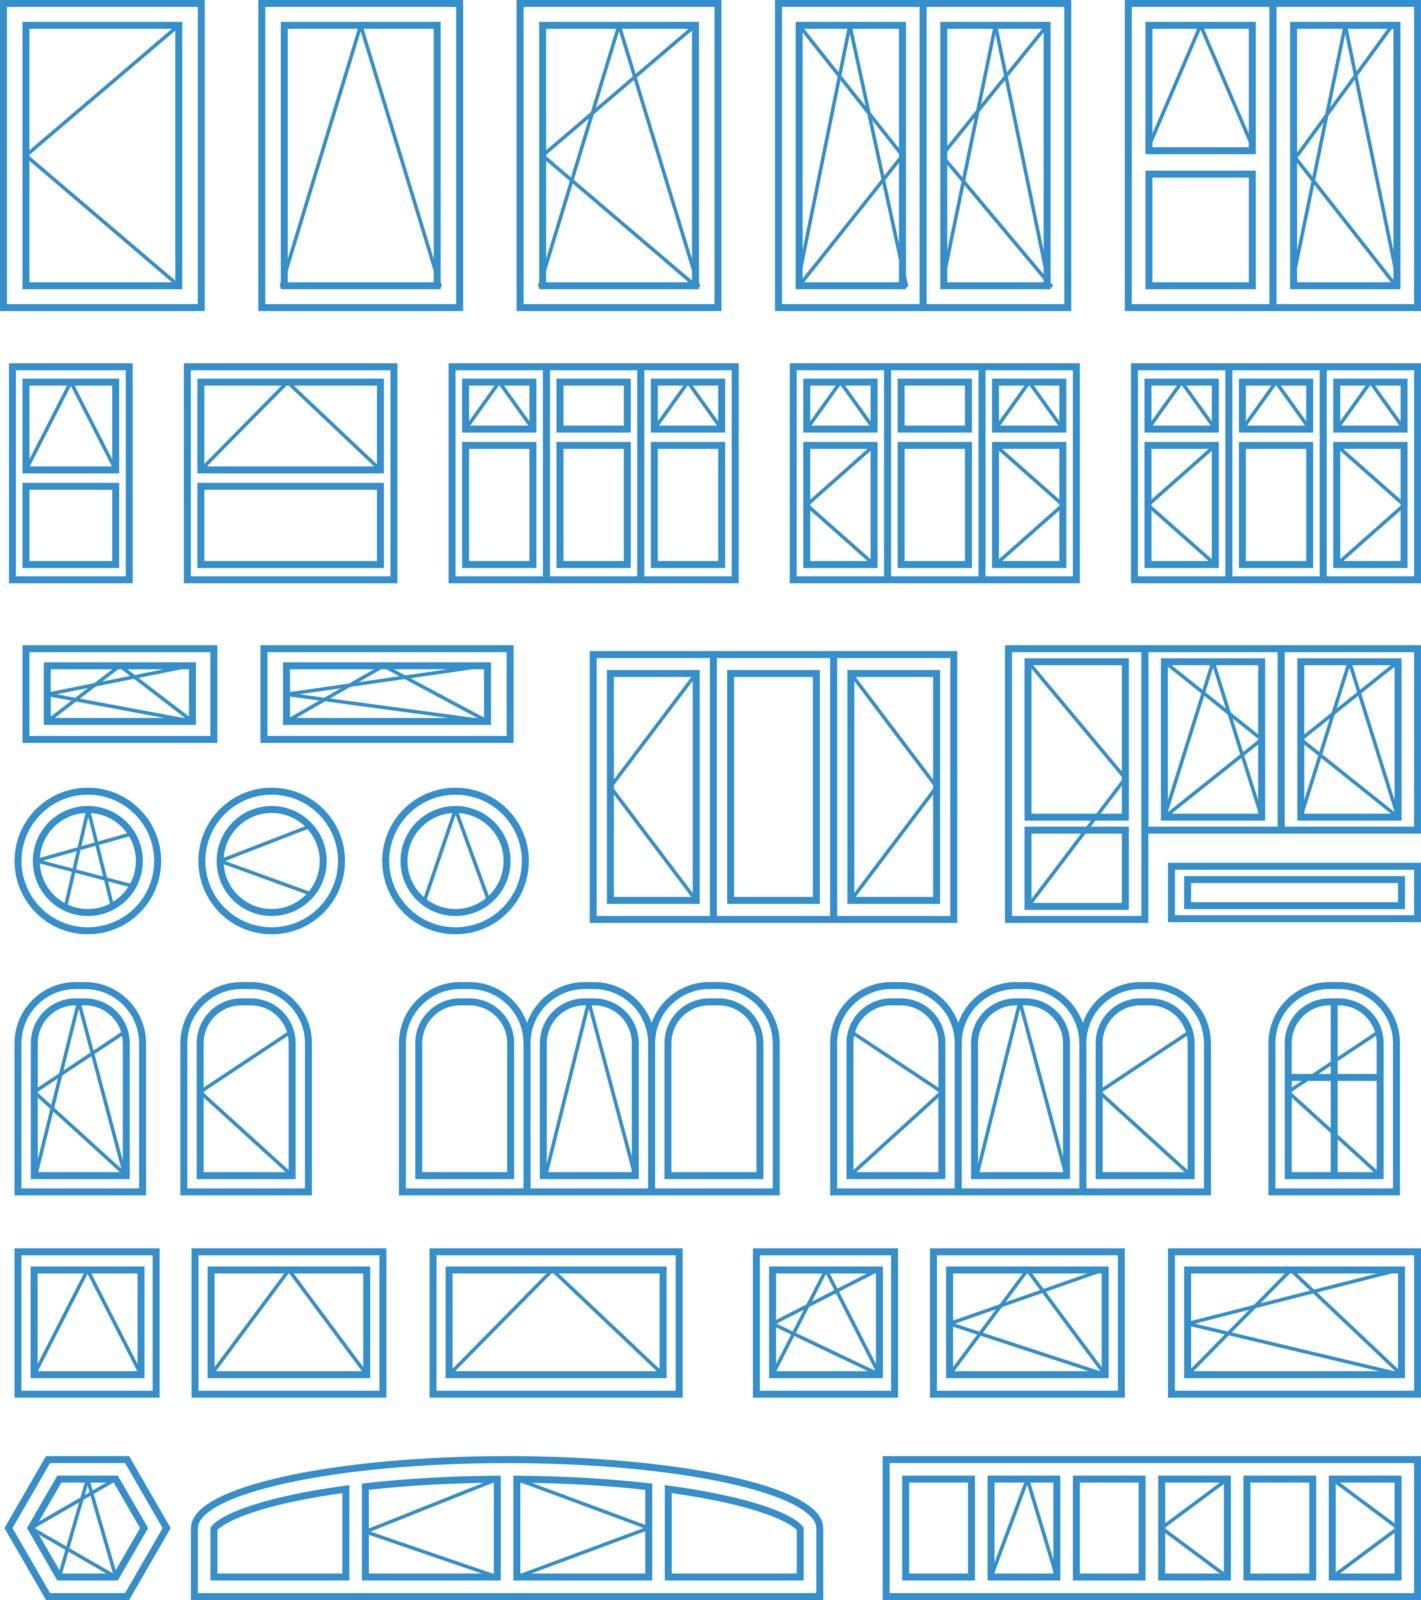 Types of opening and closing windows and doors. Vector illustration on white background